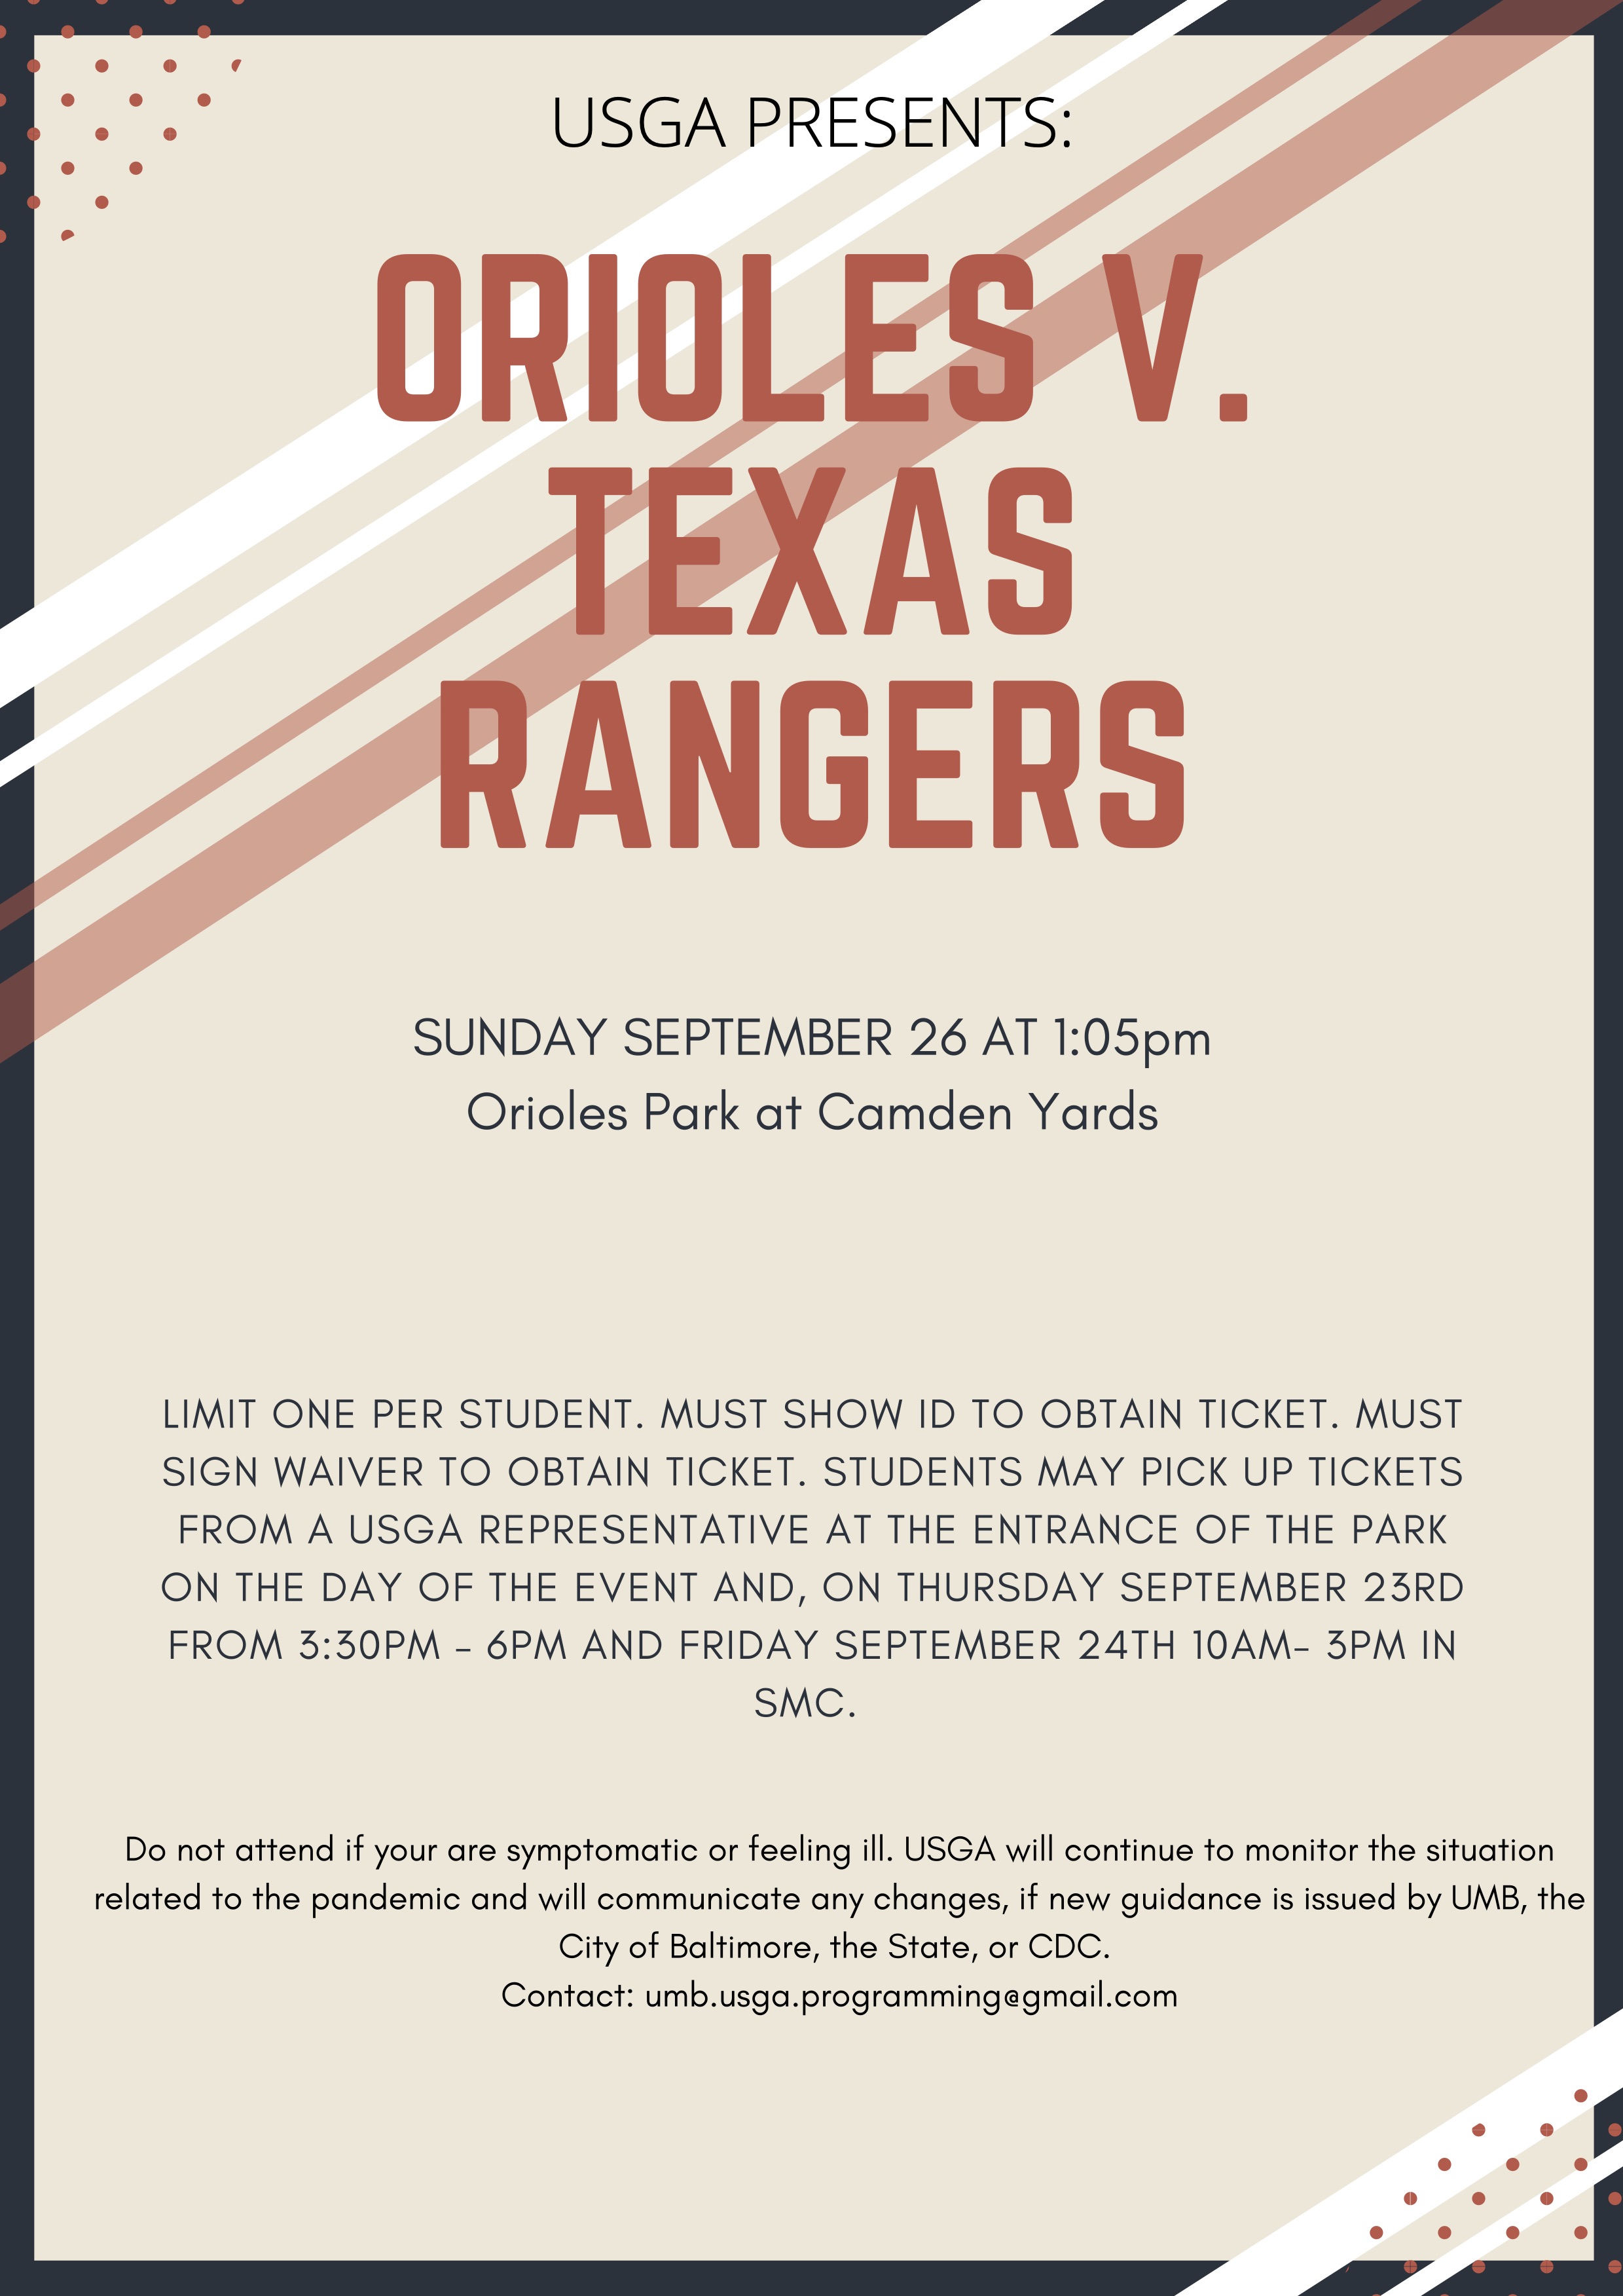 Join USGA as We Watch the Orioles Take On the Texas Rangers on Sept